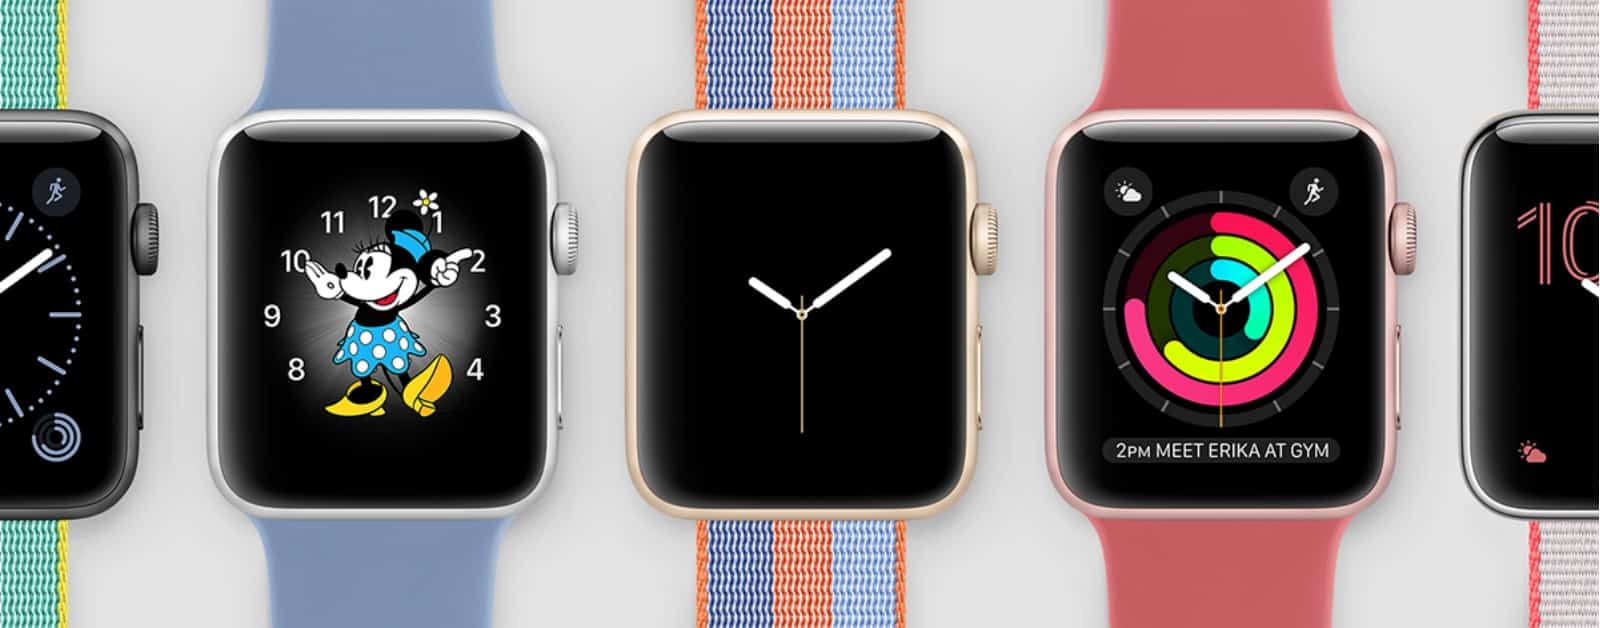 Original Apple Watch Models Could Get Replaced With Apple Watch Series 1